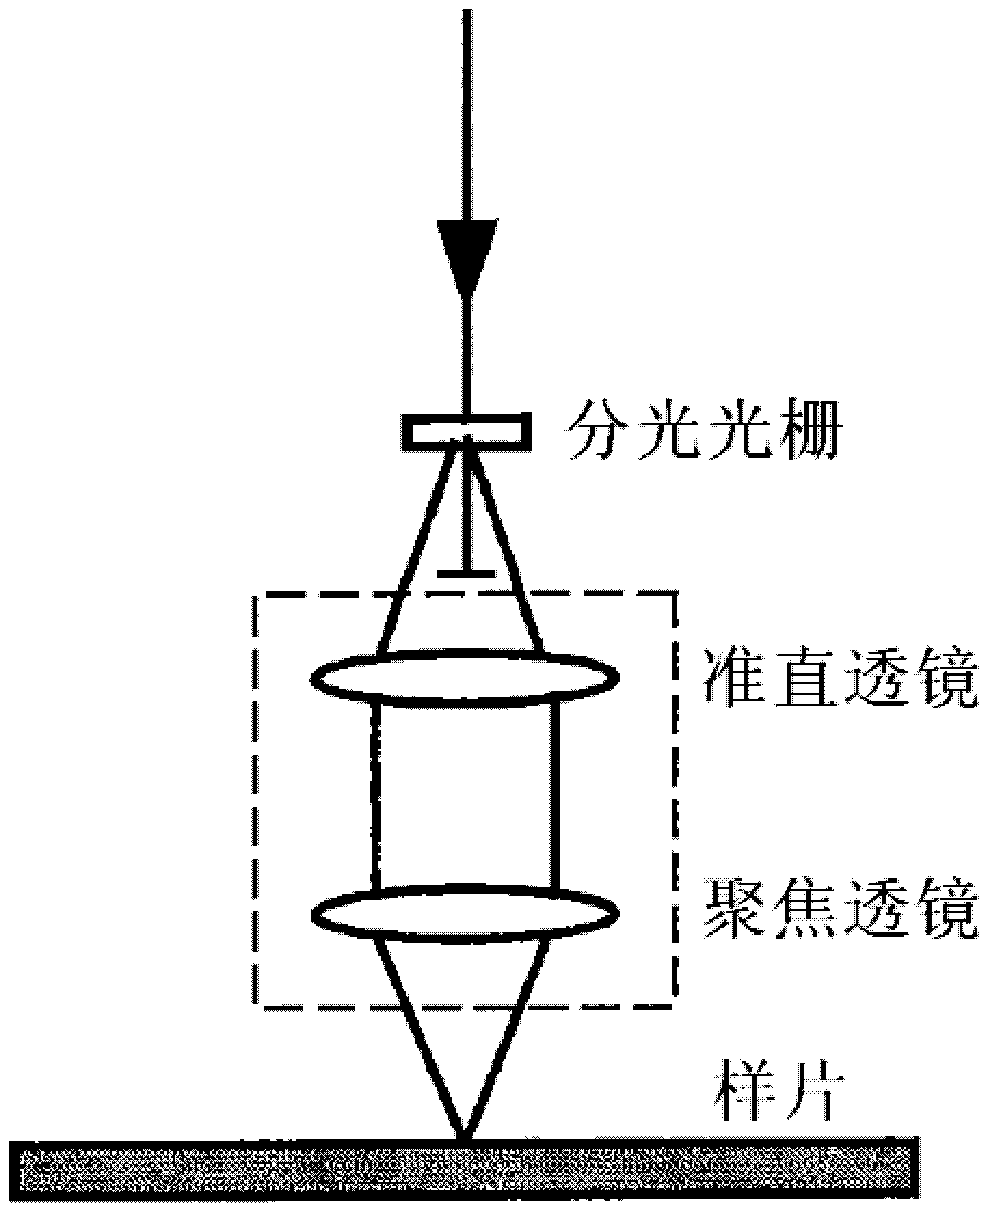 Variable-cycle multi-beam interference photoetching method